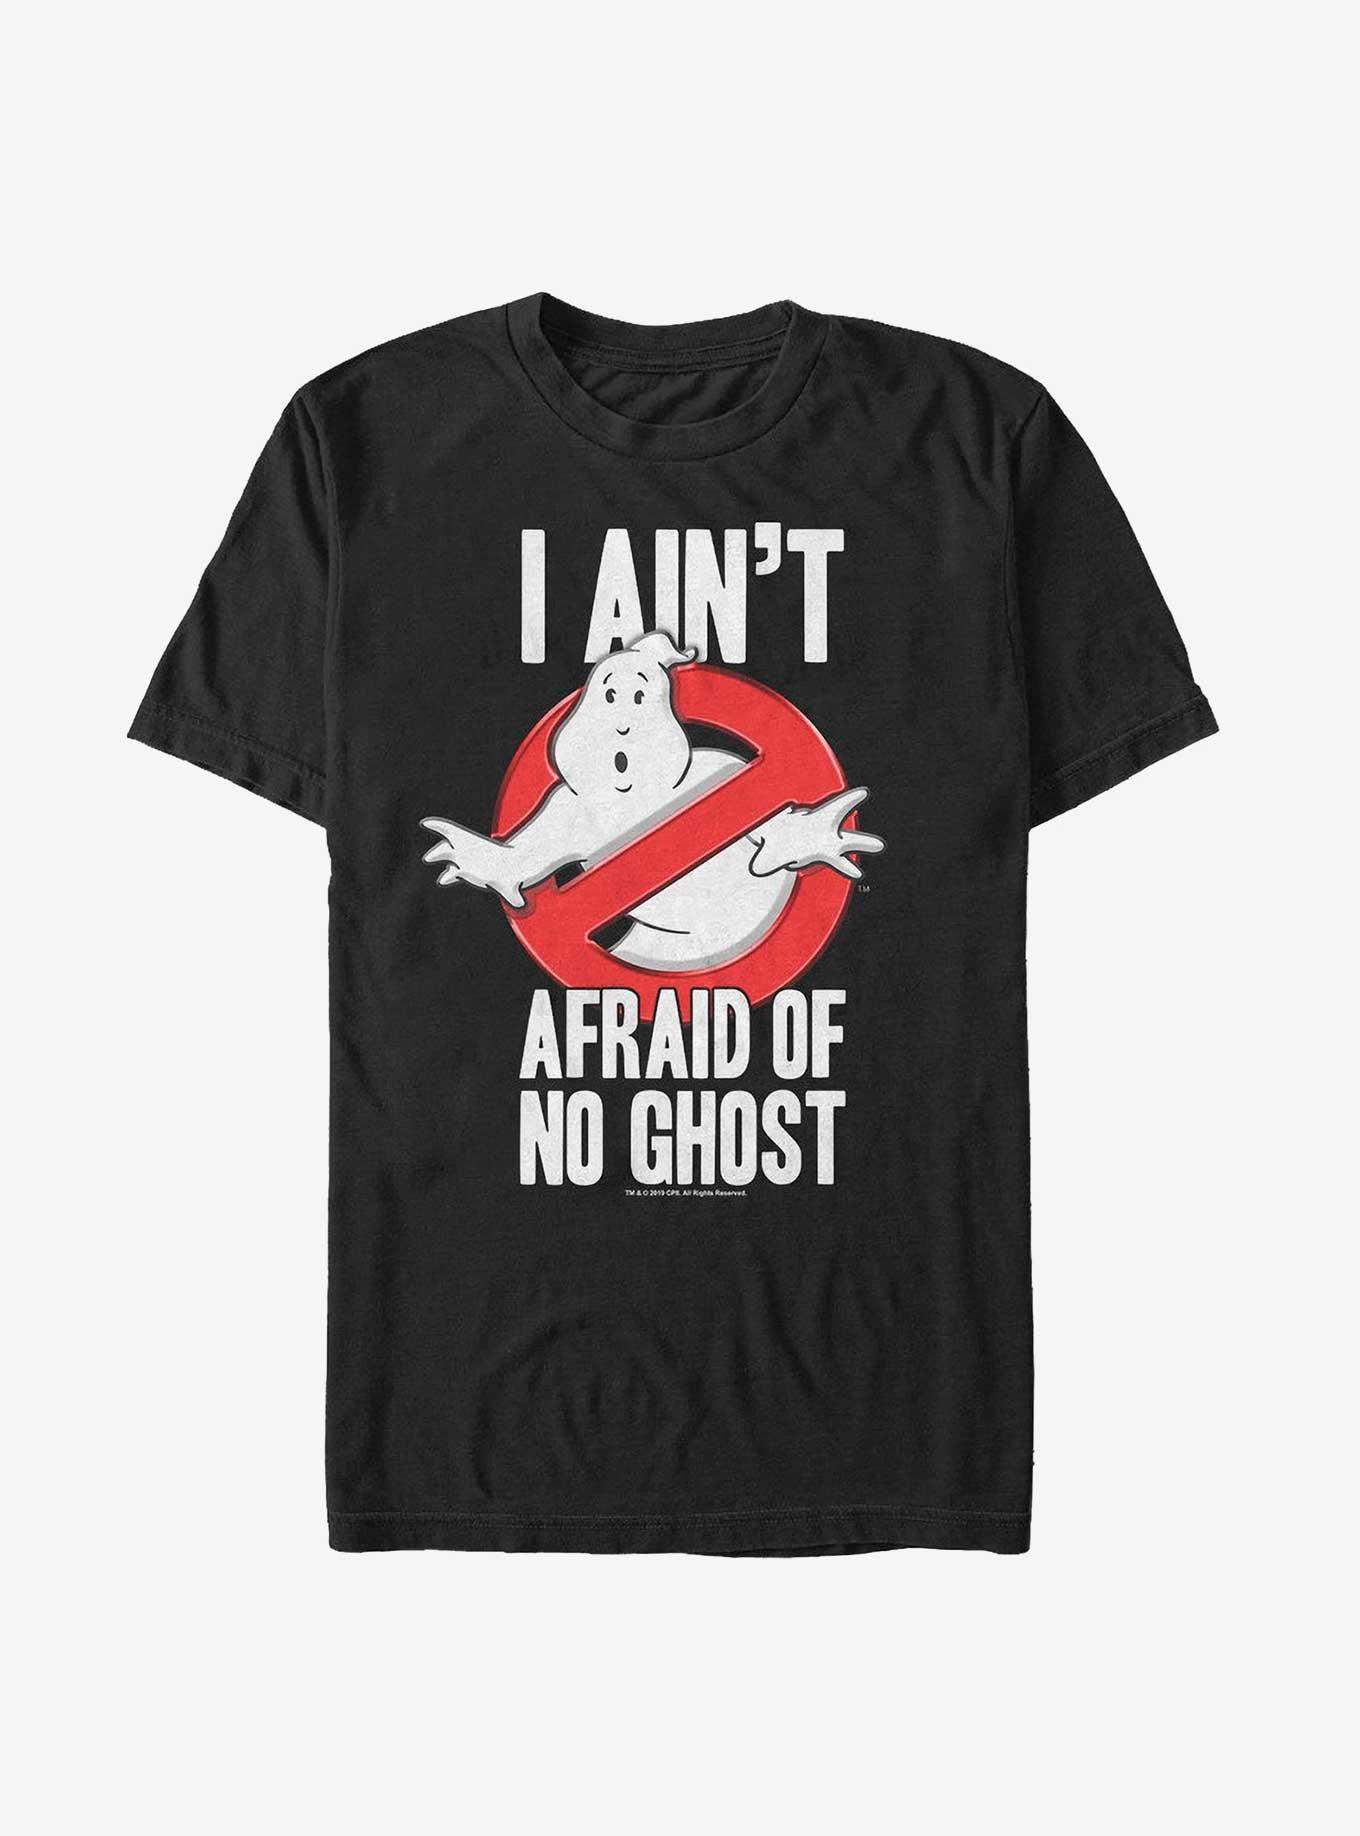 Ghostbusters I Ain't Afraid Of No Ghost T-Shirt, BLACK, hi-res